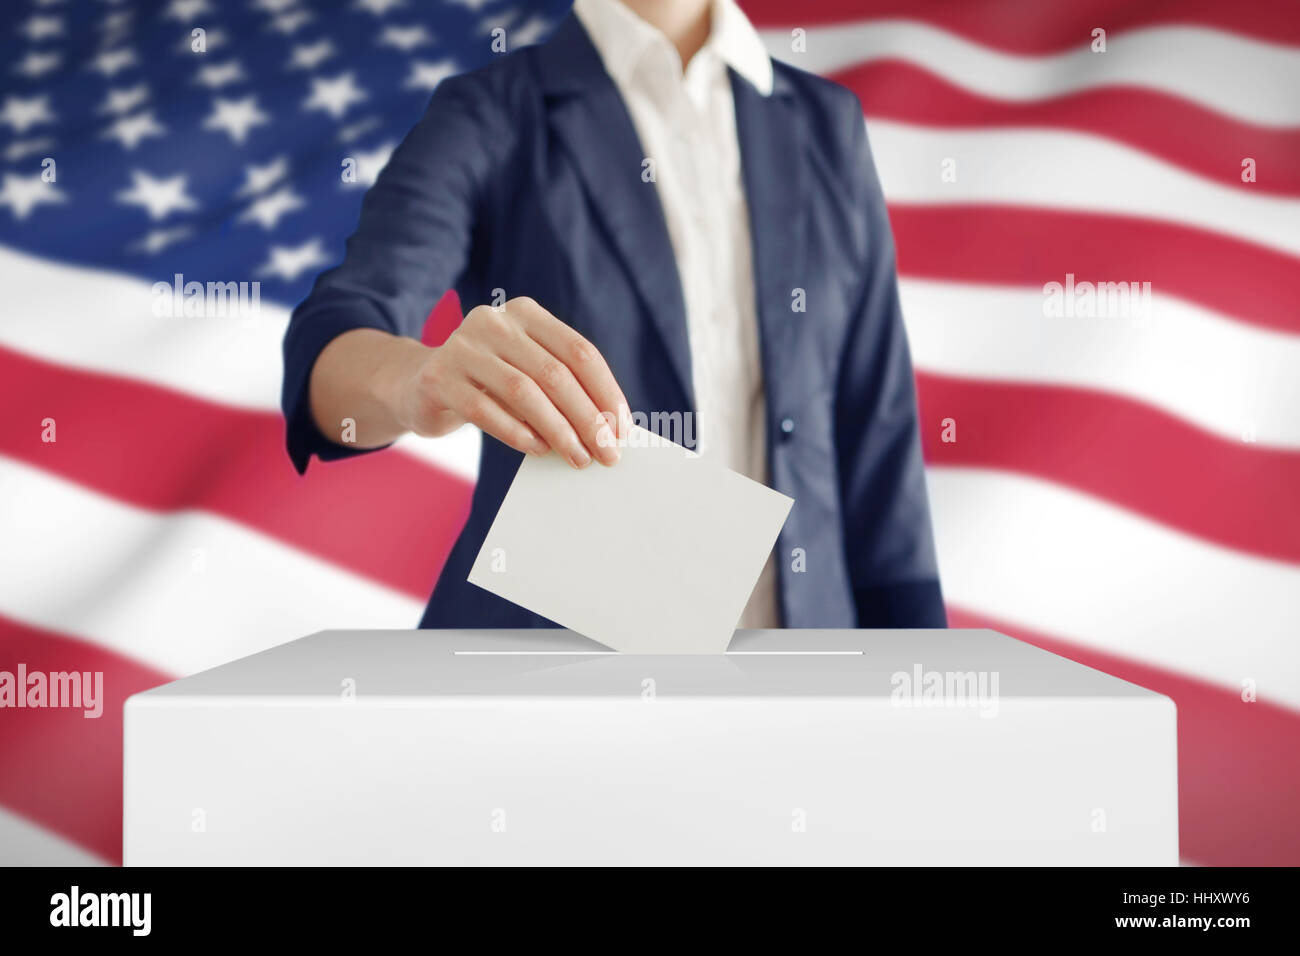 Woman putting a ballot into a voting box with USA flag on background. Stock Photo